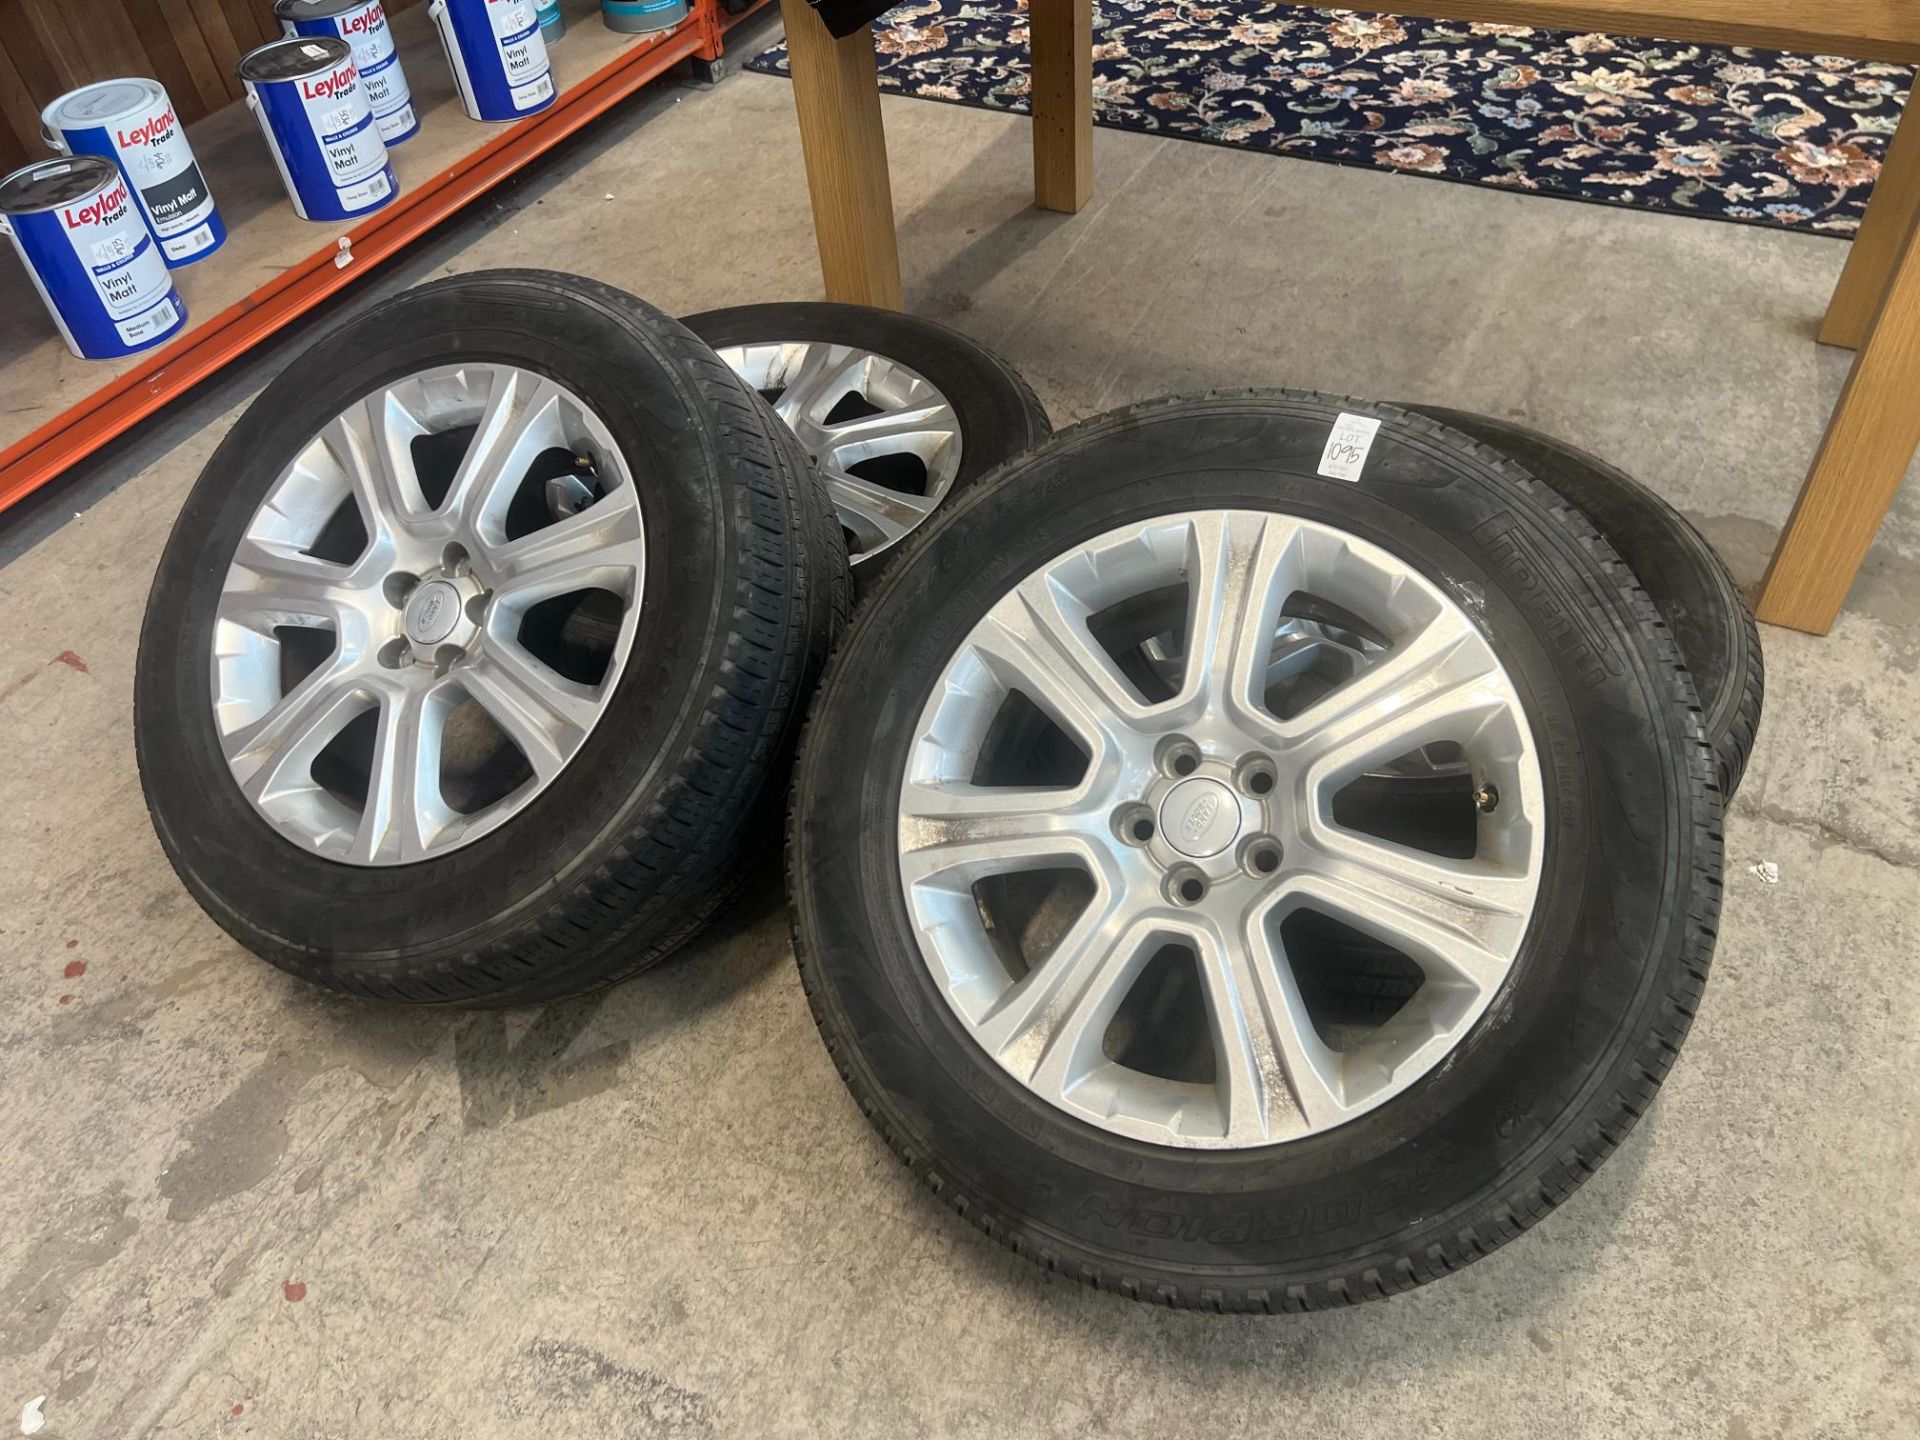 SET OF FOUR LAND ROVER EVOQUE WHEELS AND TYRES 235/60/18